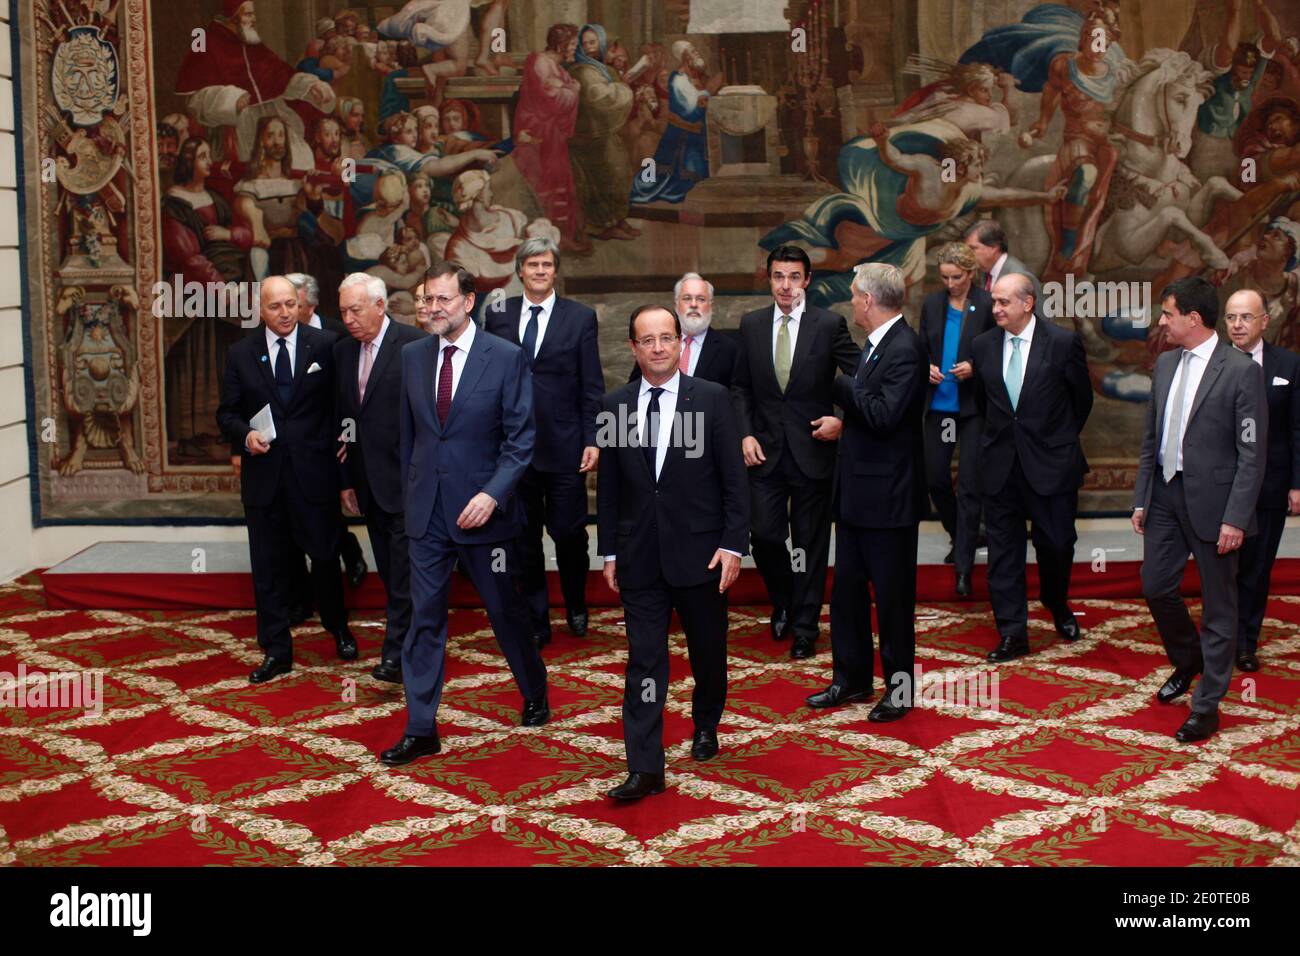 (From L to R French Foreign Affairs Minister Laurent Fabius, Spanish Minister of Foreign Affairs Jose Manuel Garcia Margallo, Spanish Prime Minister Mariano Rajoy, French President Francois Hollande, French Prime Minister, Jean-Marc Ayrault, Spanish Interior Minister, Jorge Fernandez Diaz and French Interior Minister Manuel Valls, French Junior Minister for Transports and Maritime Economy, Frederic Cuvillier, Spanish Minister of Development, Ana Pastor Julian, French Agriculture Minister, Stephane Le Foll, Spanish Agriculture and Environment Minister, Miguel Arias Canete, Spanish Minister of I Stock Photo